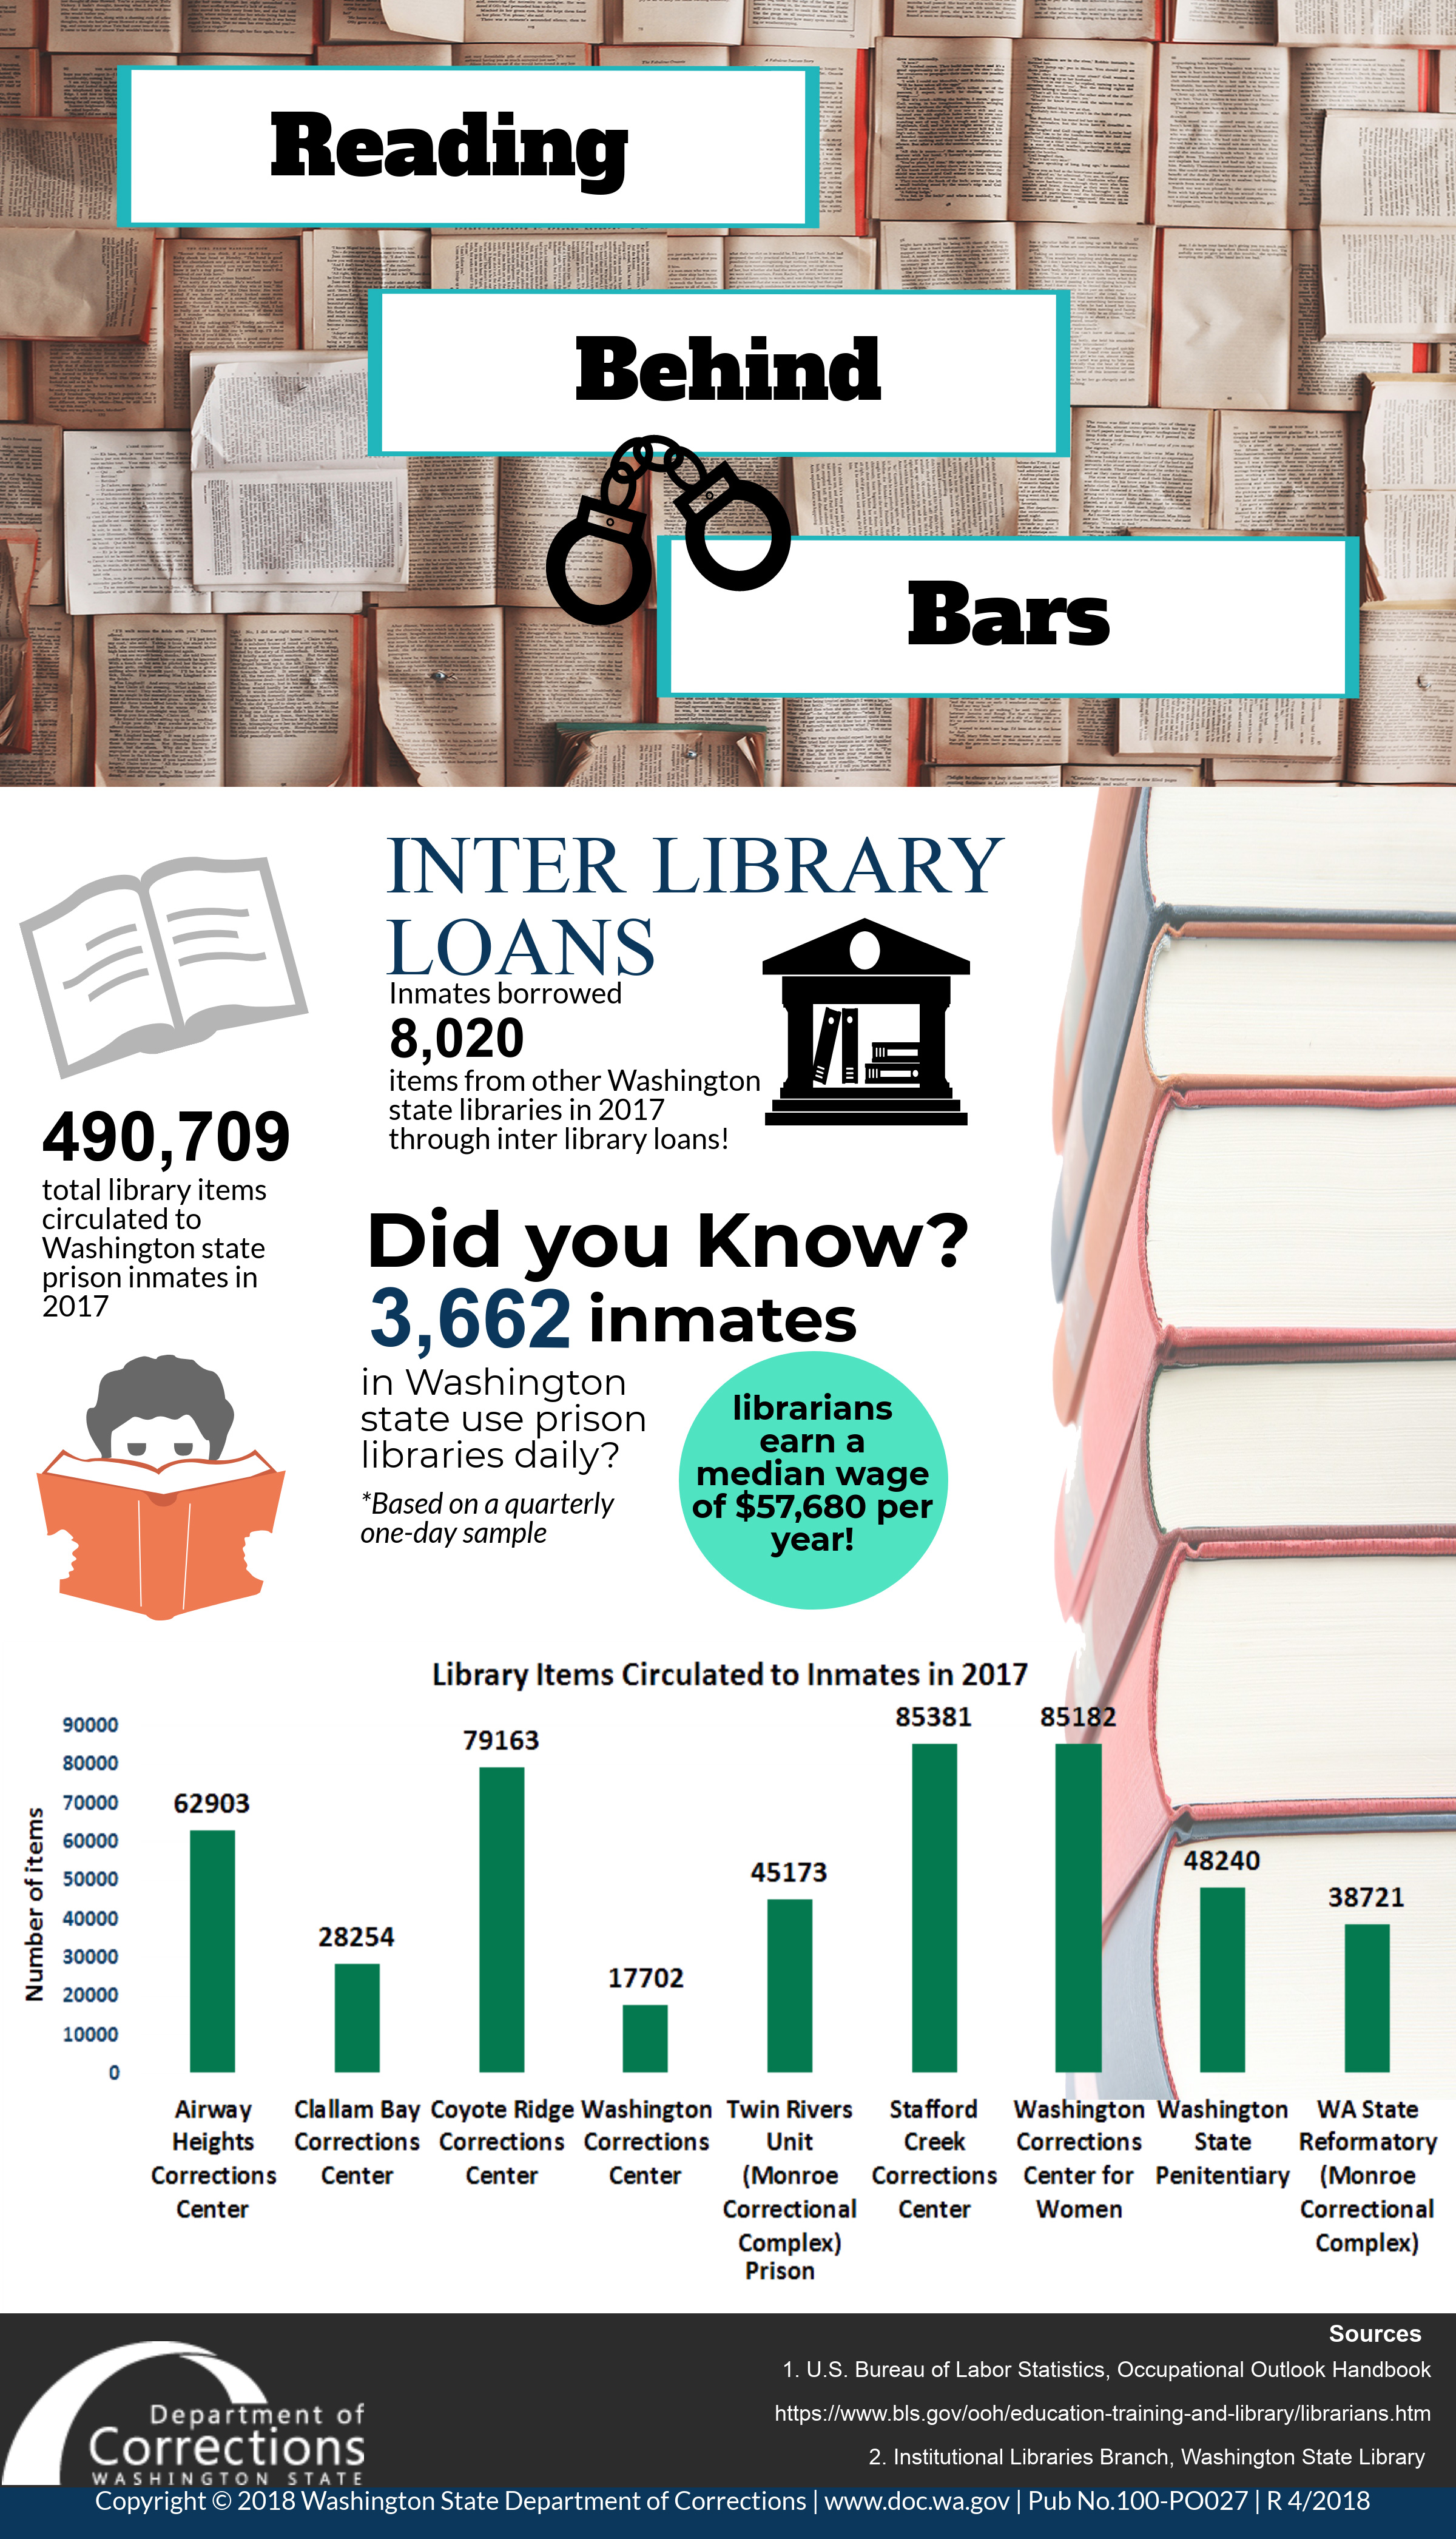 infographic with bar chart listing number of library items per prison circulated to Washington state inmates in the year 2017 